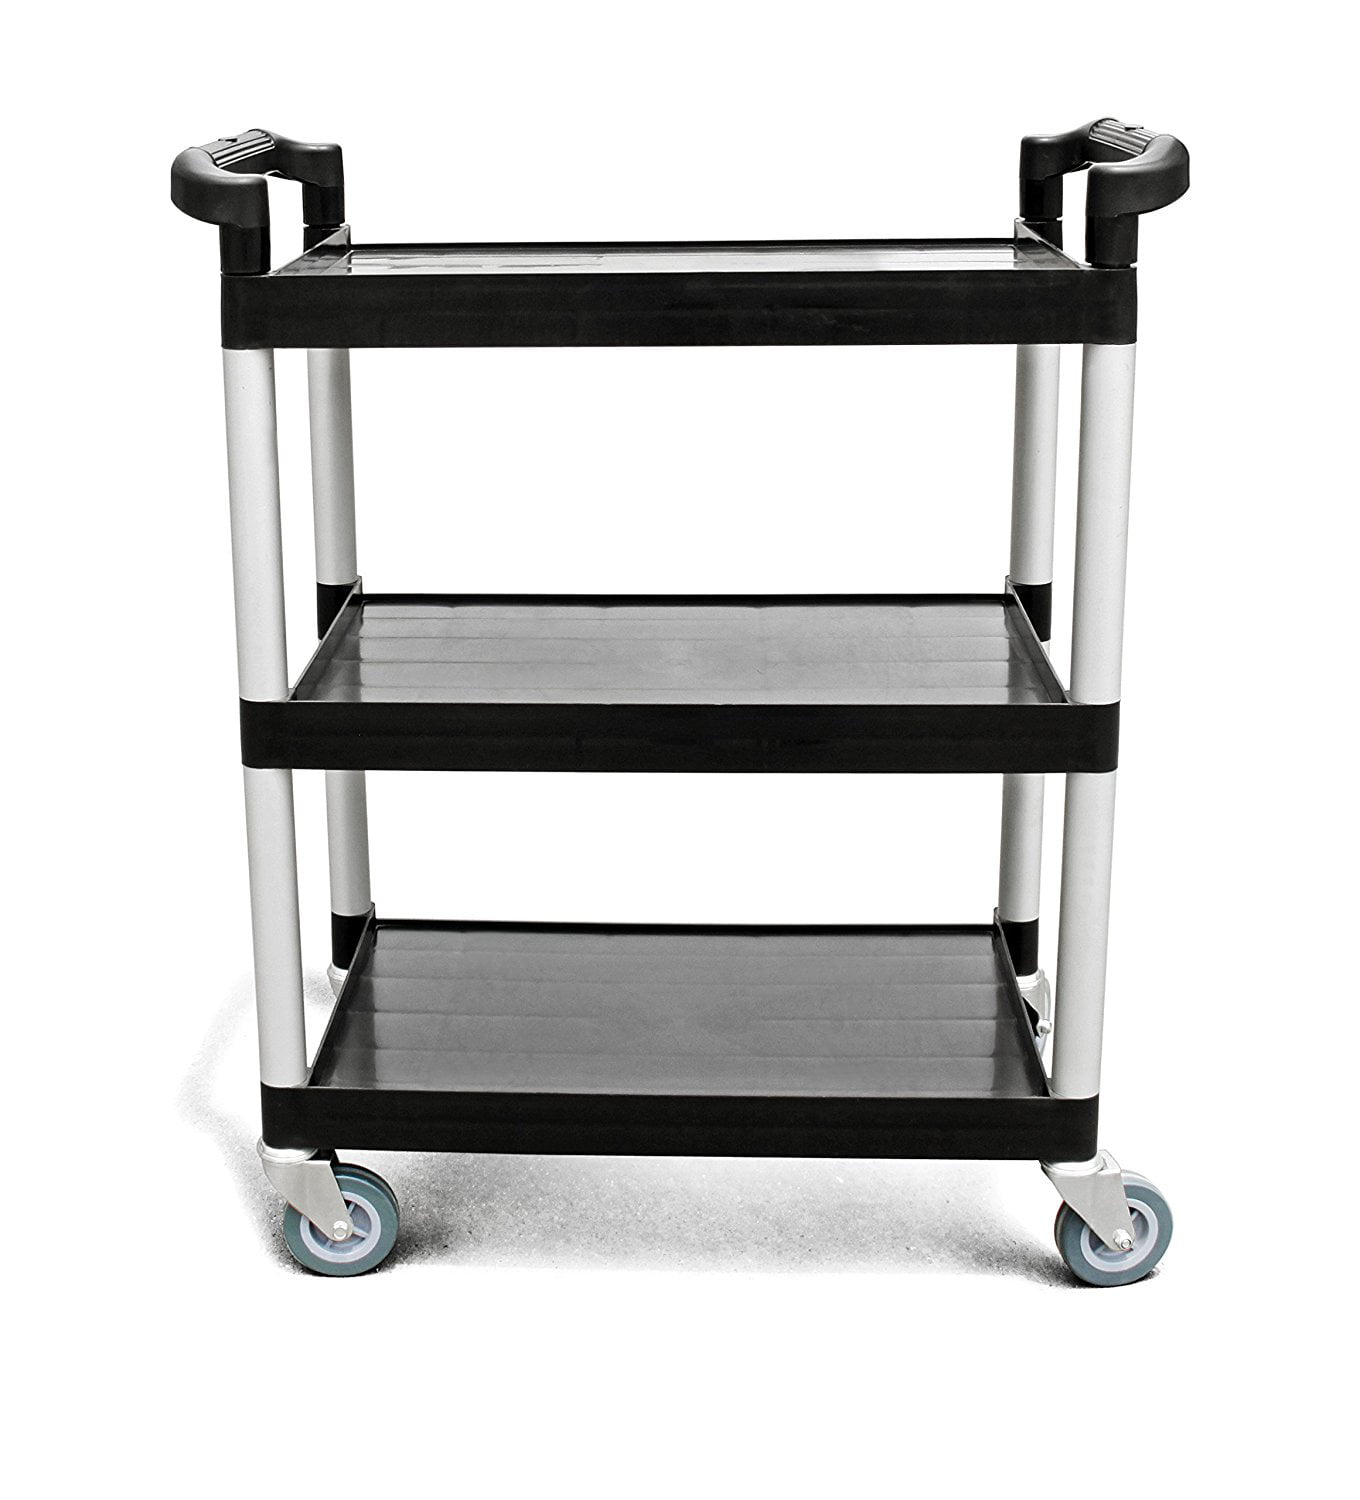 New Star 54552 Utility Bus Cart with locking Casters 350-Lb Load,42.5 by 19.5 by 38.5-Inch,Black 